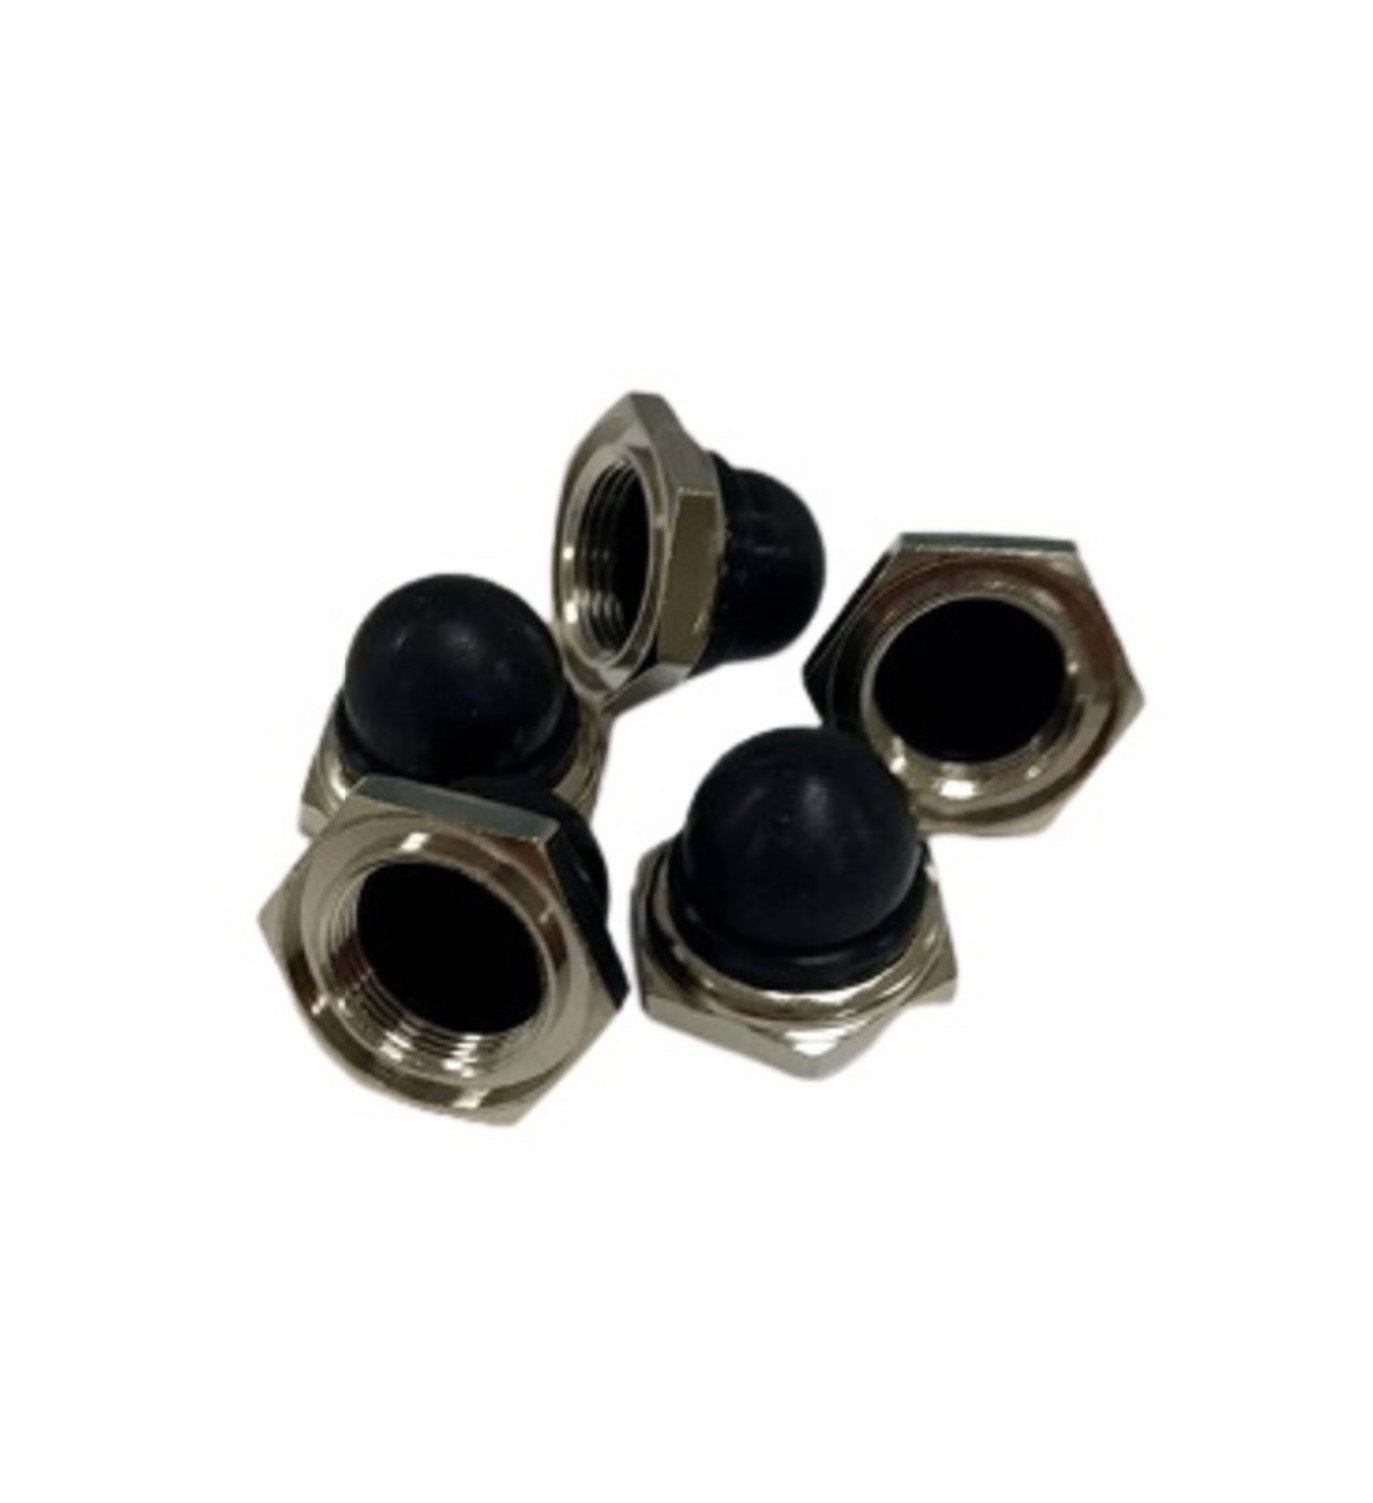 Rubber mountings (rubber to metal bonded) component